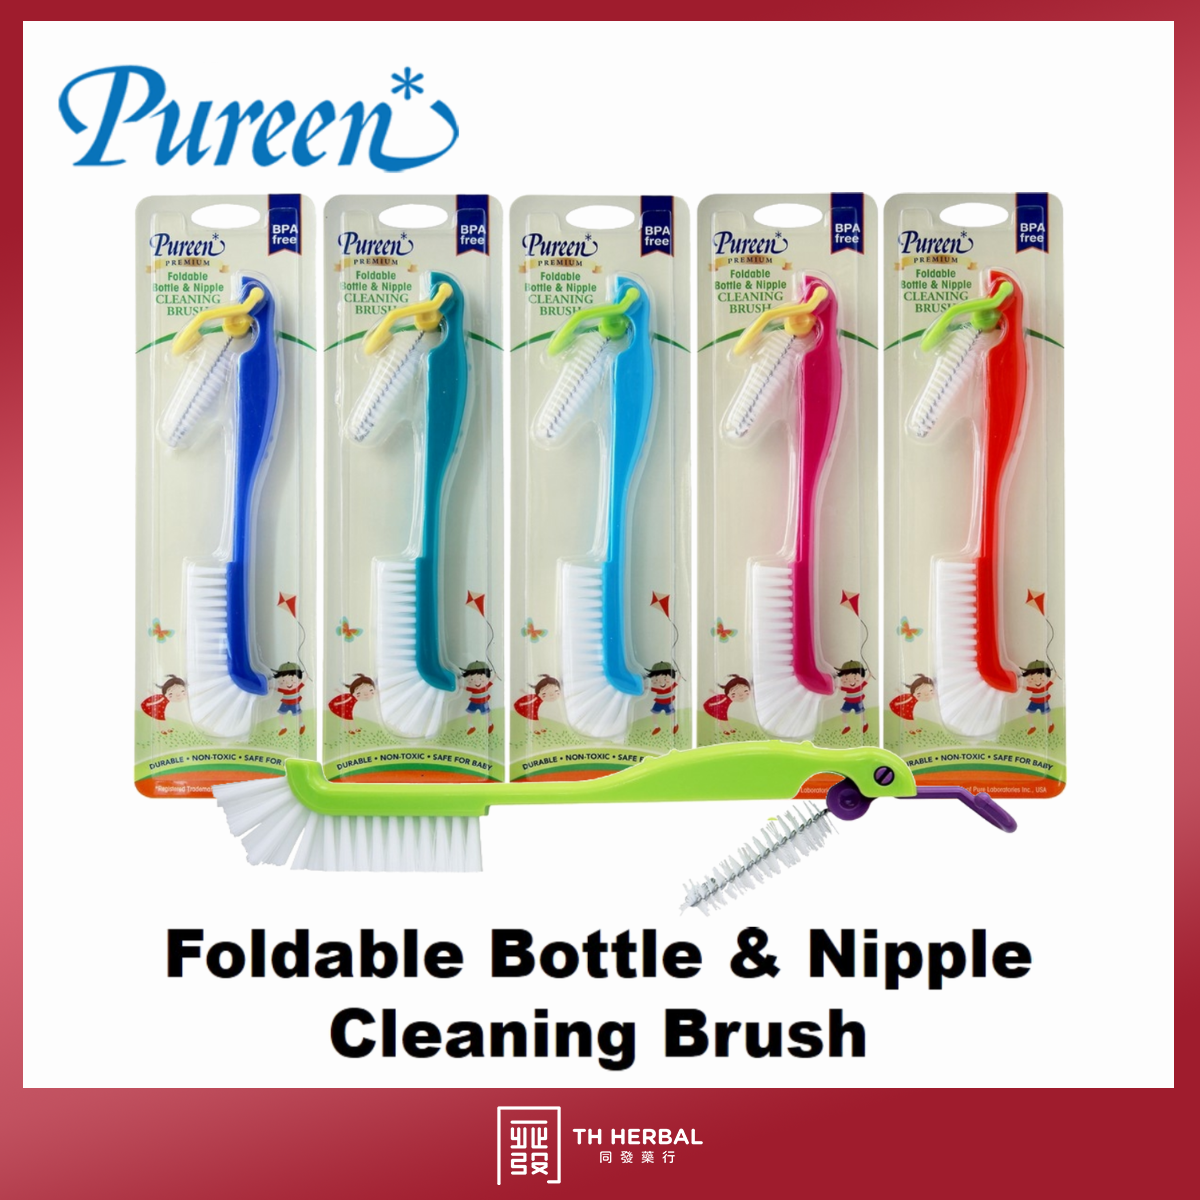 Pureen foldable bottle n nipple cleaning brush.png